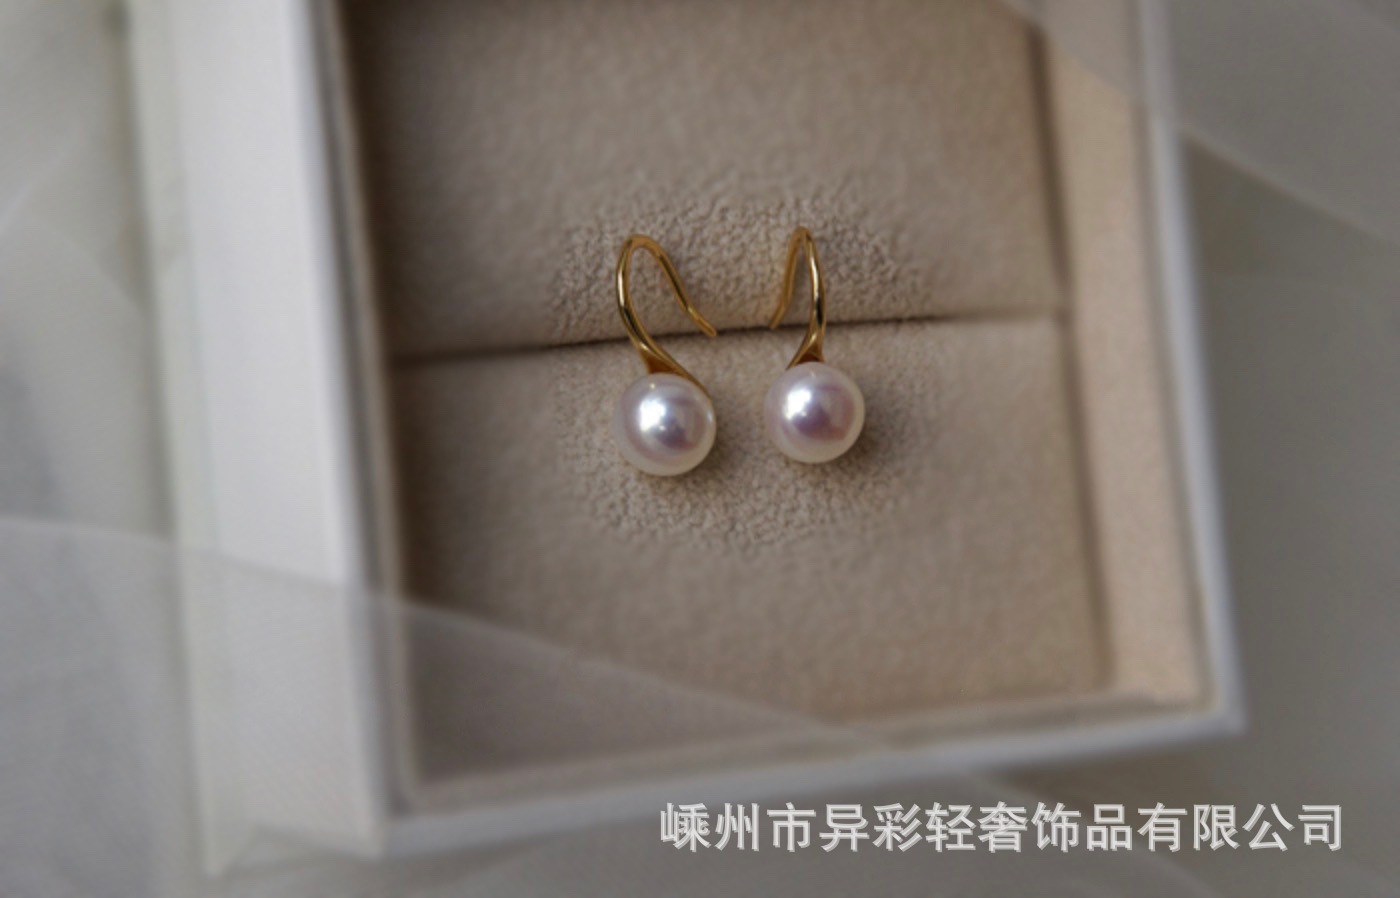 Colorful Homemade Light Luxury Earrings Jewelry Natural Fresh Water Pearl Earrings S925 Sterling Silver Gold-Plated High Heels Ear Hook